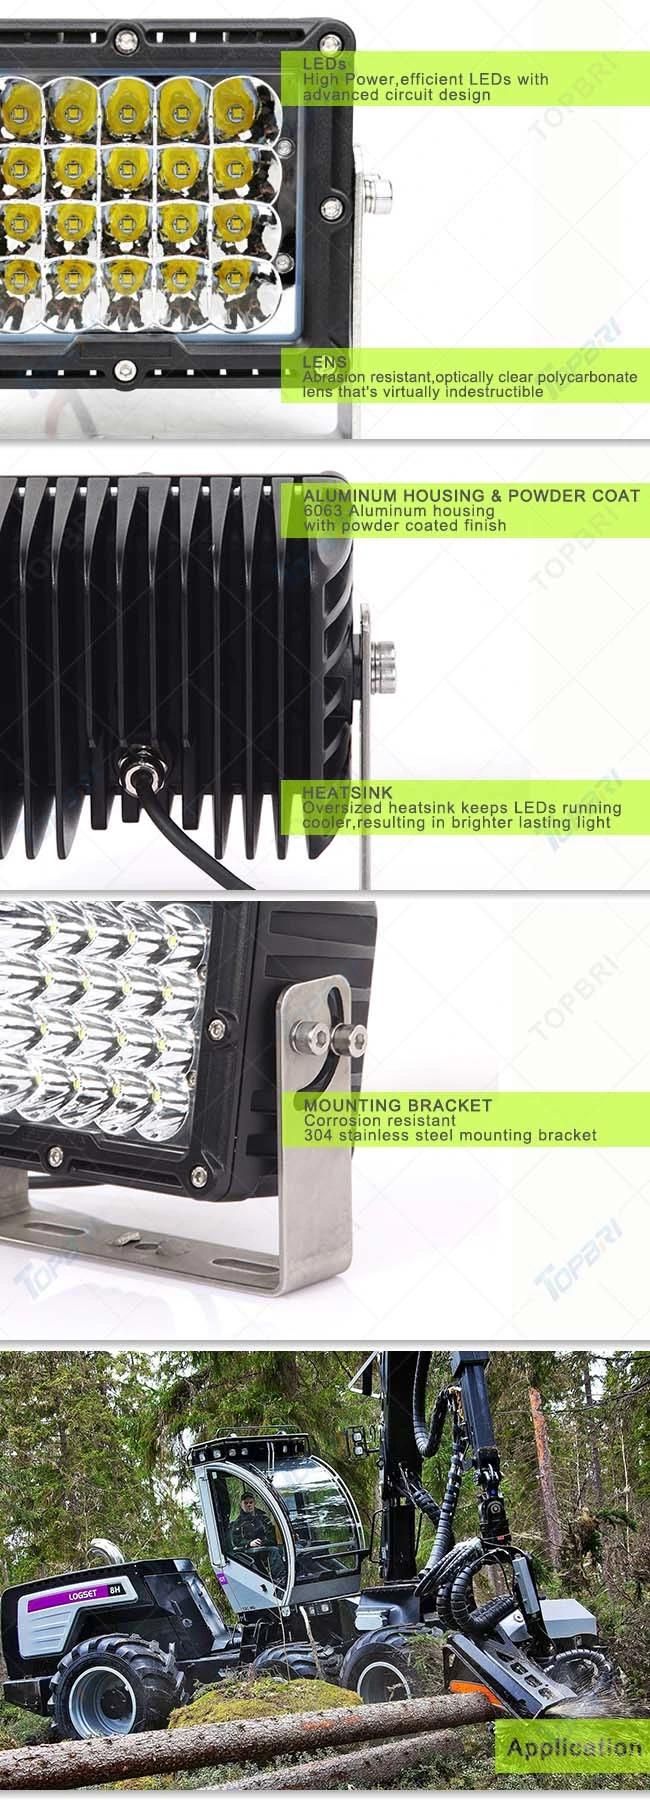 100W IP68 Square LED Truck Driving Heavy Duty Light